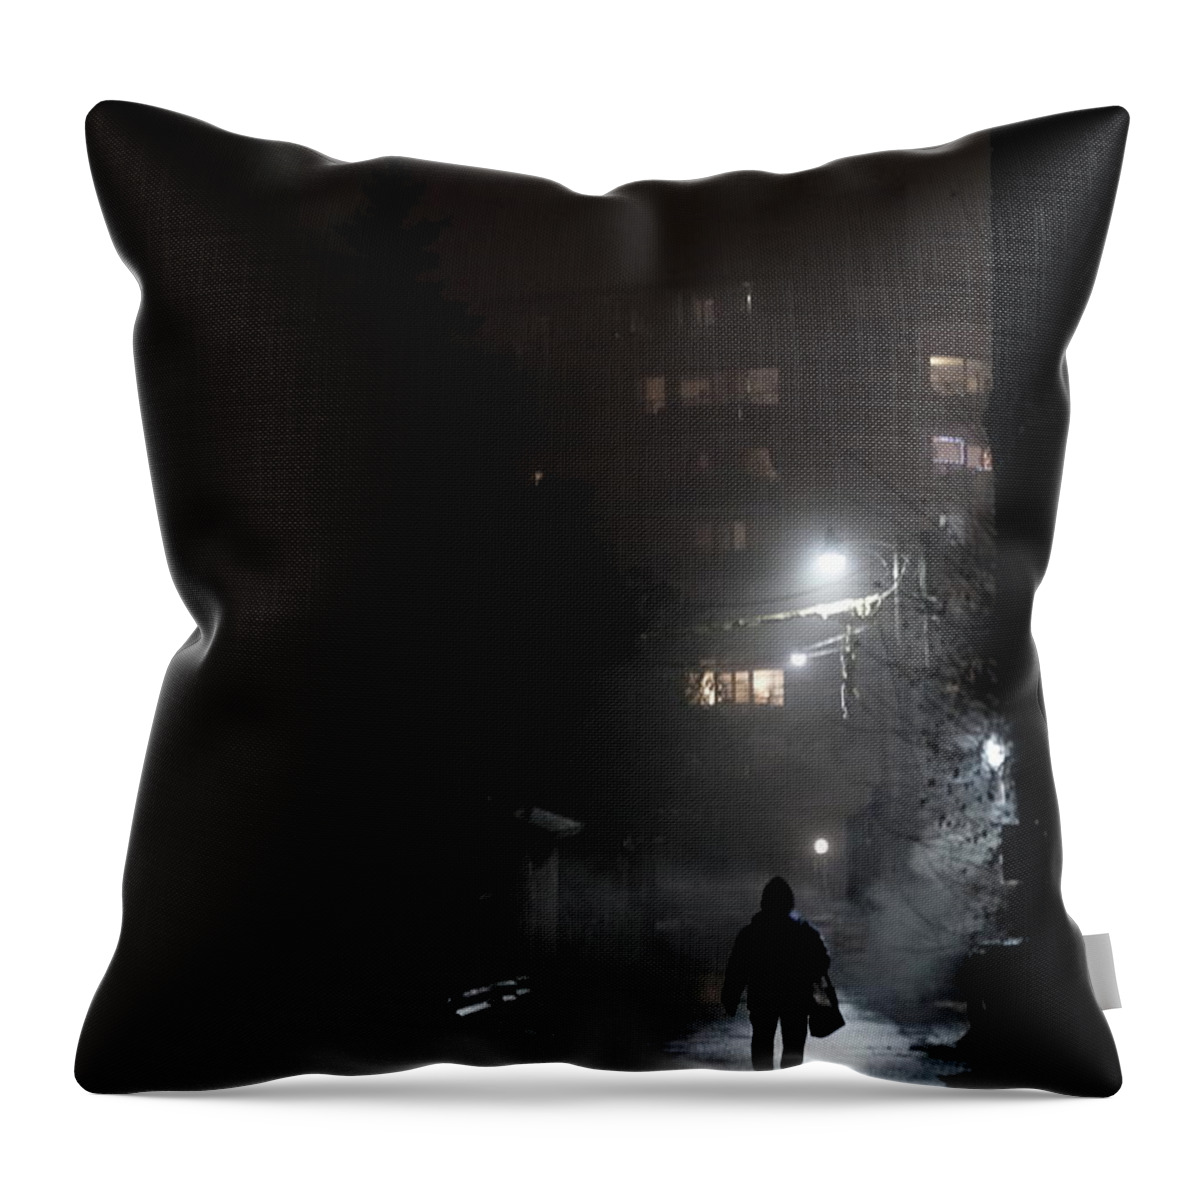 Urban Throw Pillow featuring the photograph Up The Alley by Kreddible Trout